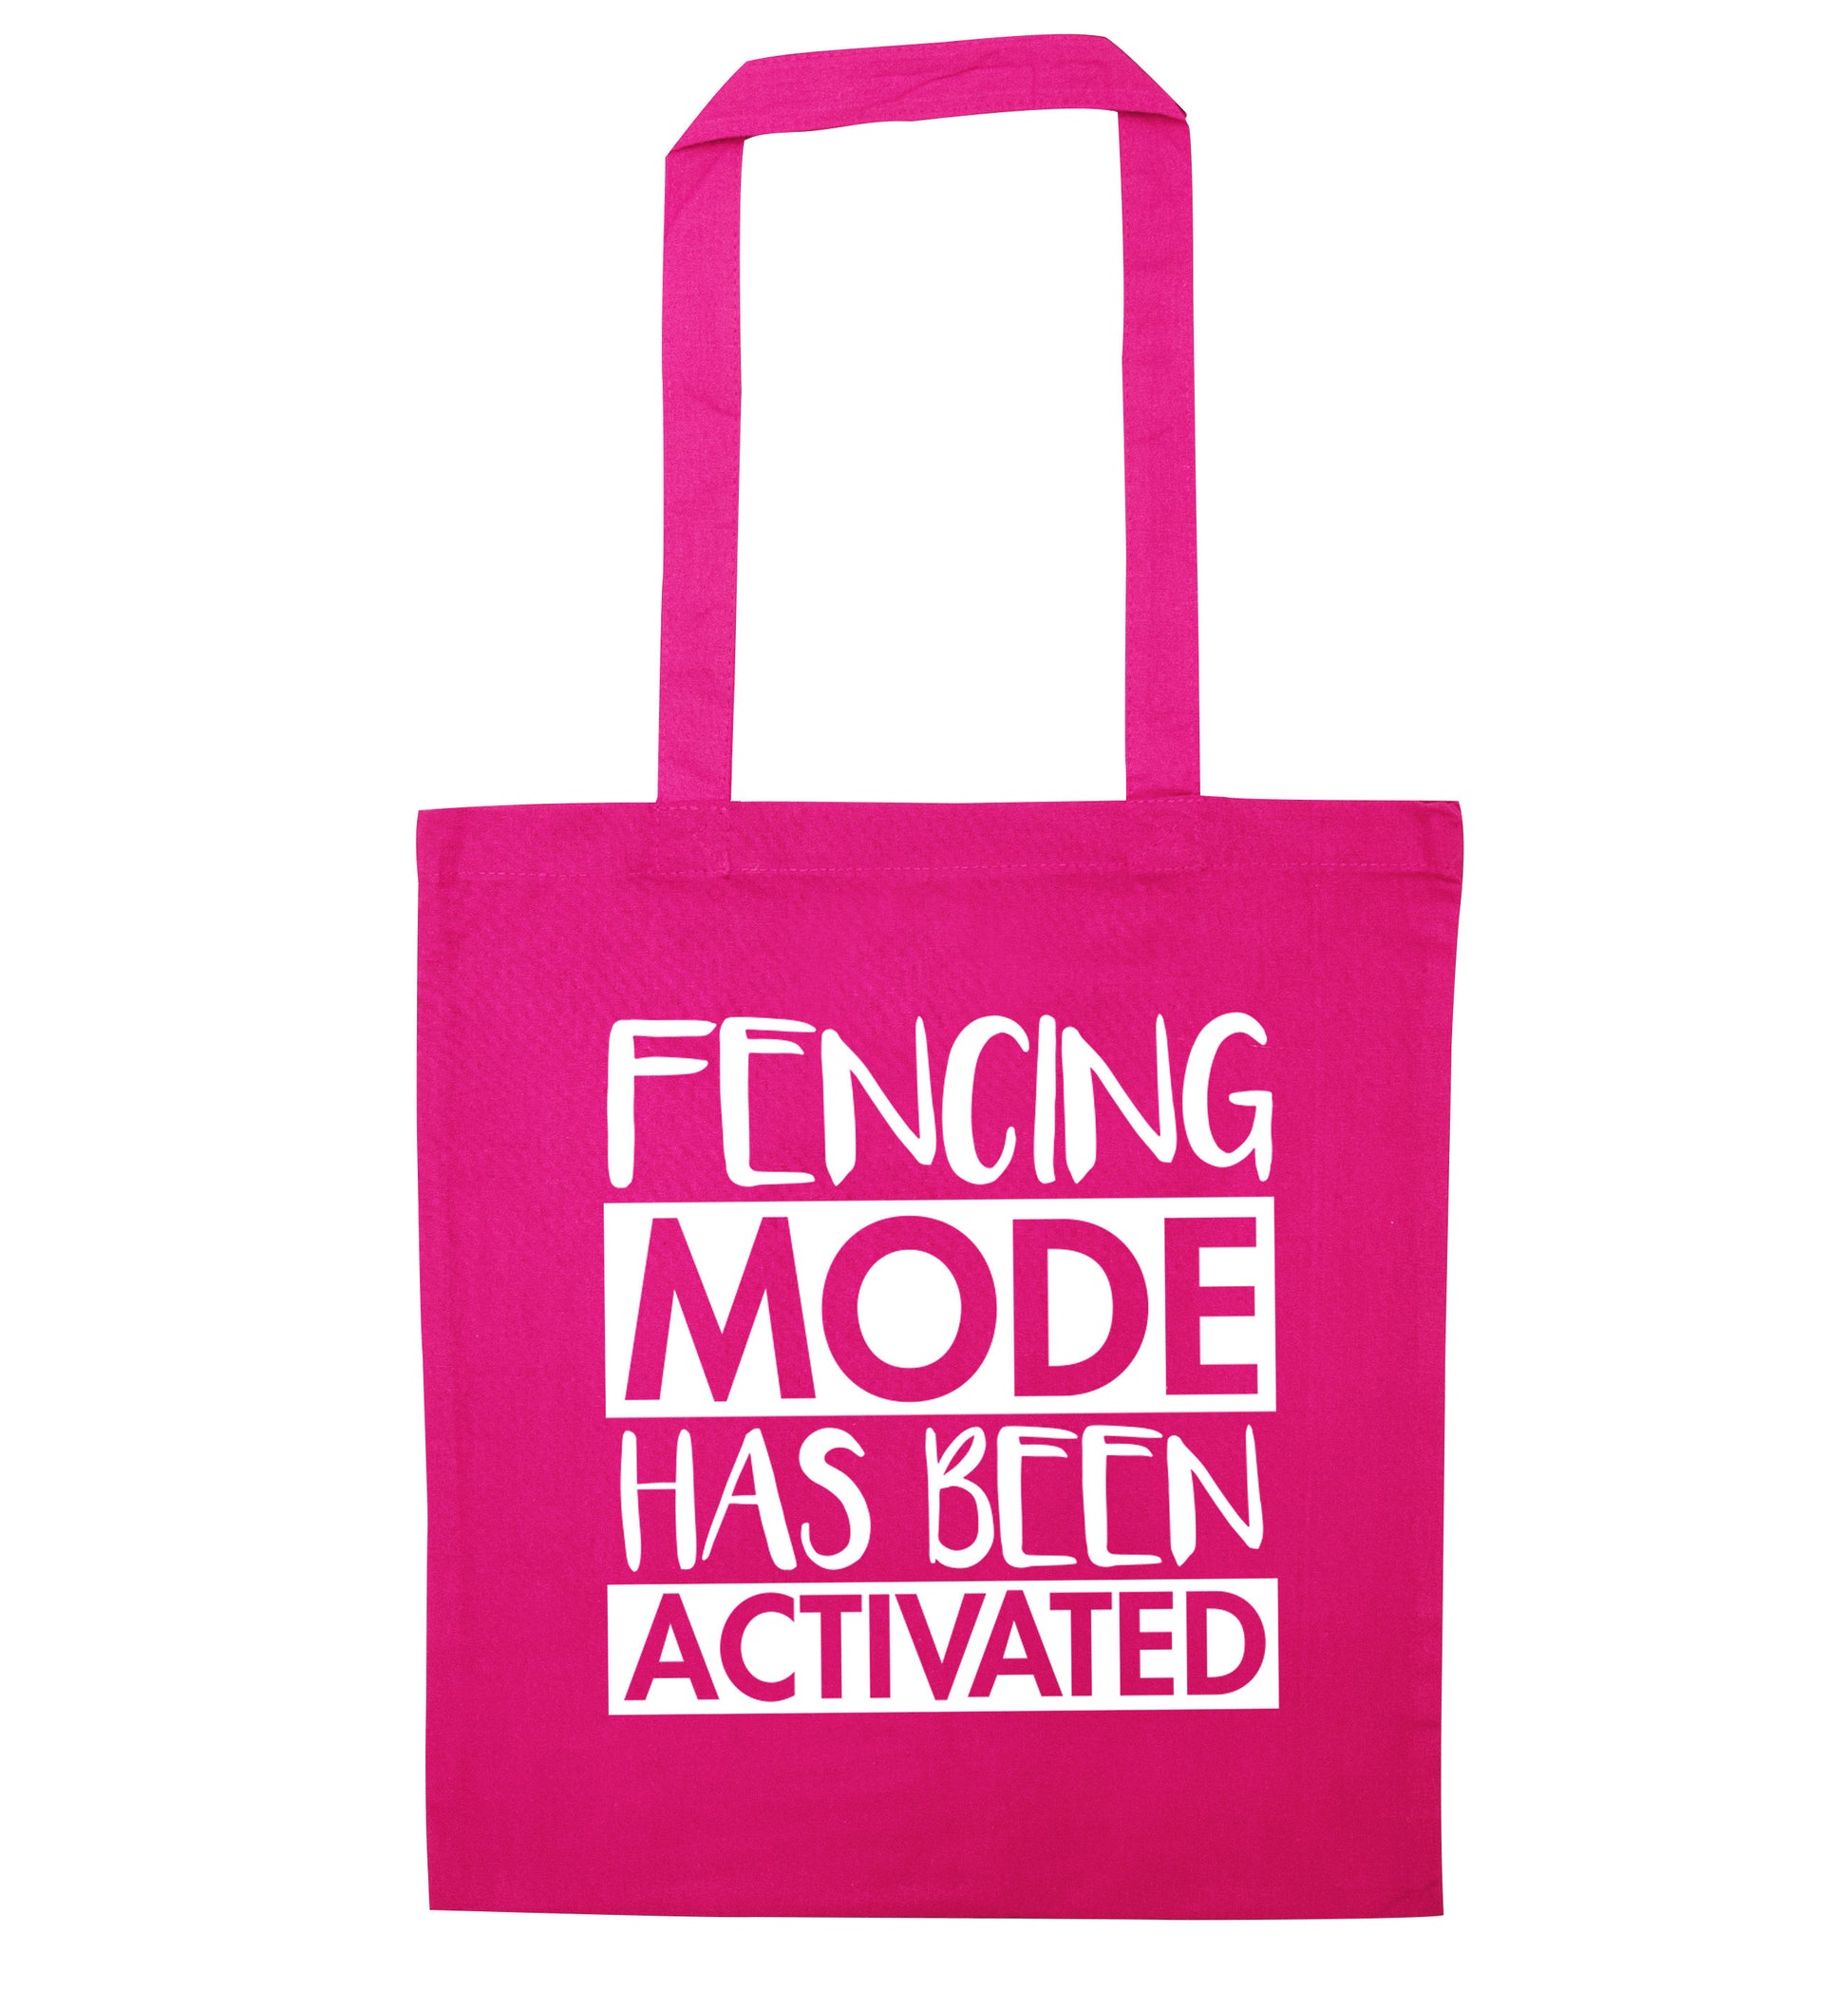 Fencing mode activated pink tote bag